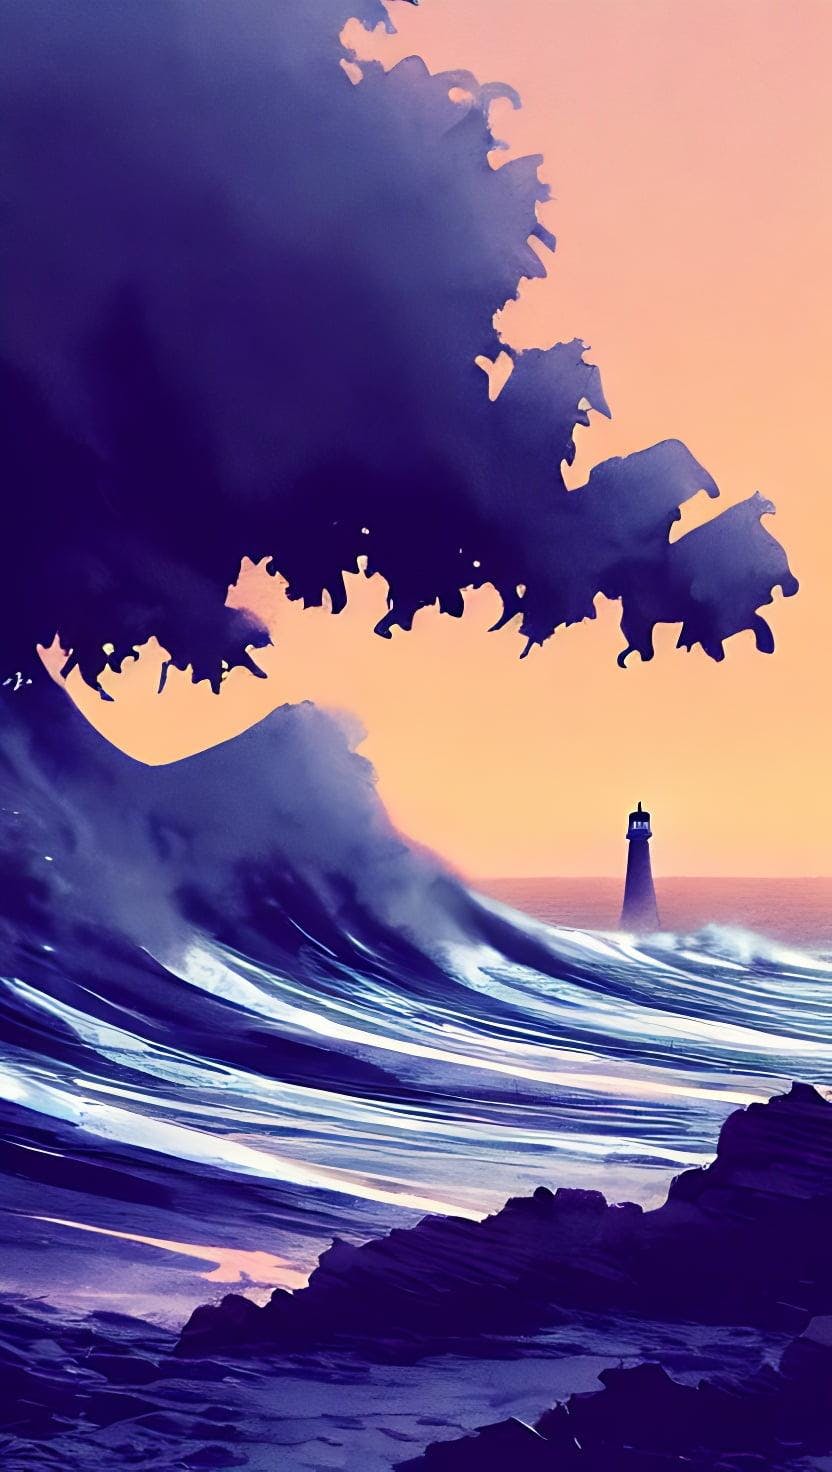 Digital Painting Of Majestic Waves Crashing Against A Tall Lit Lighthouse In The Distance At Dawn